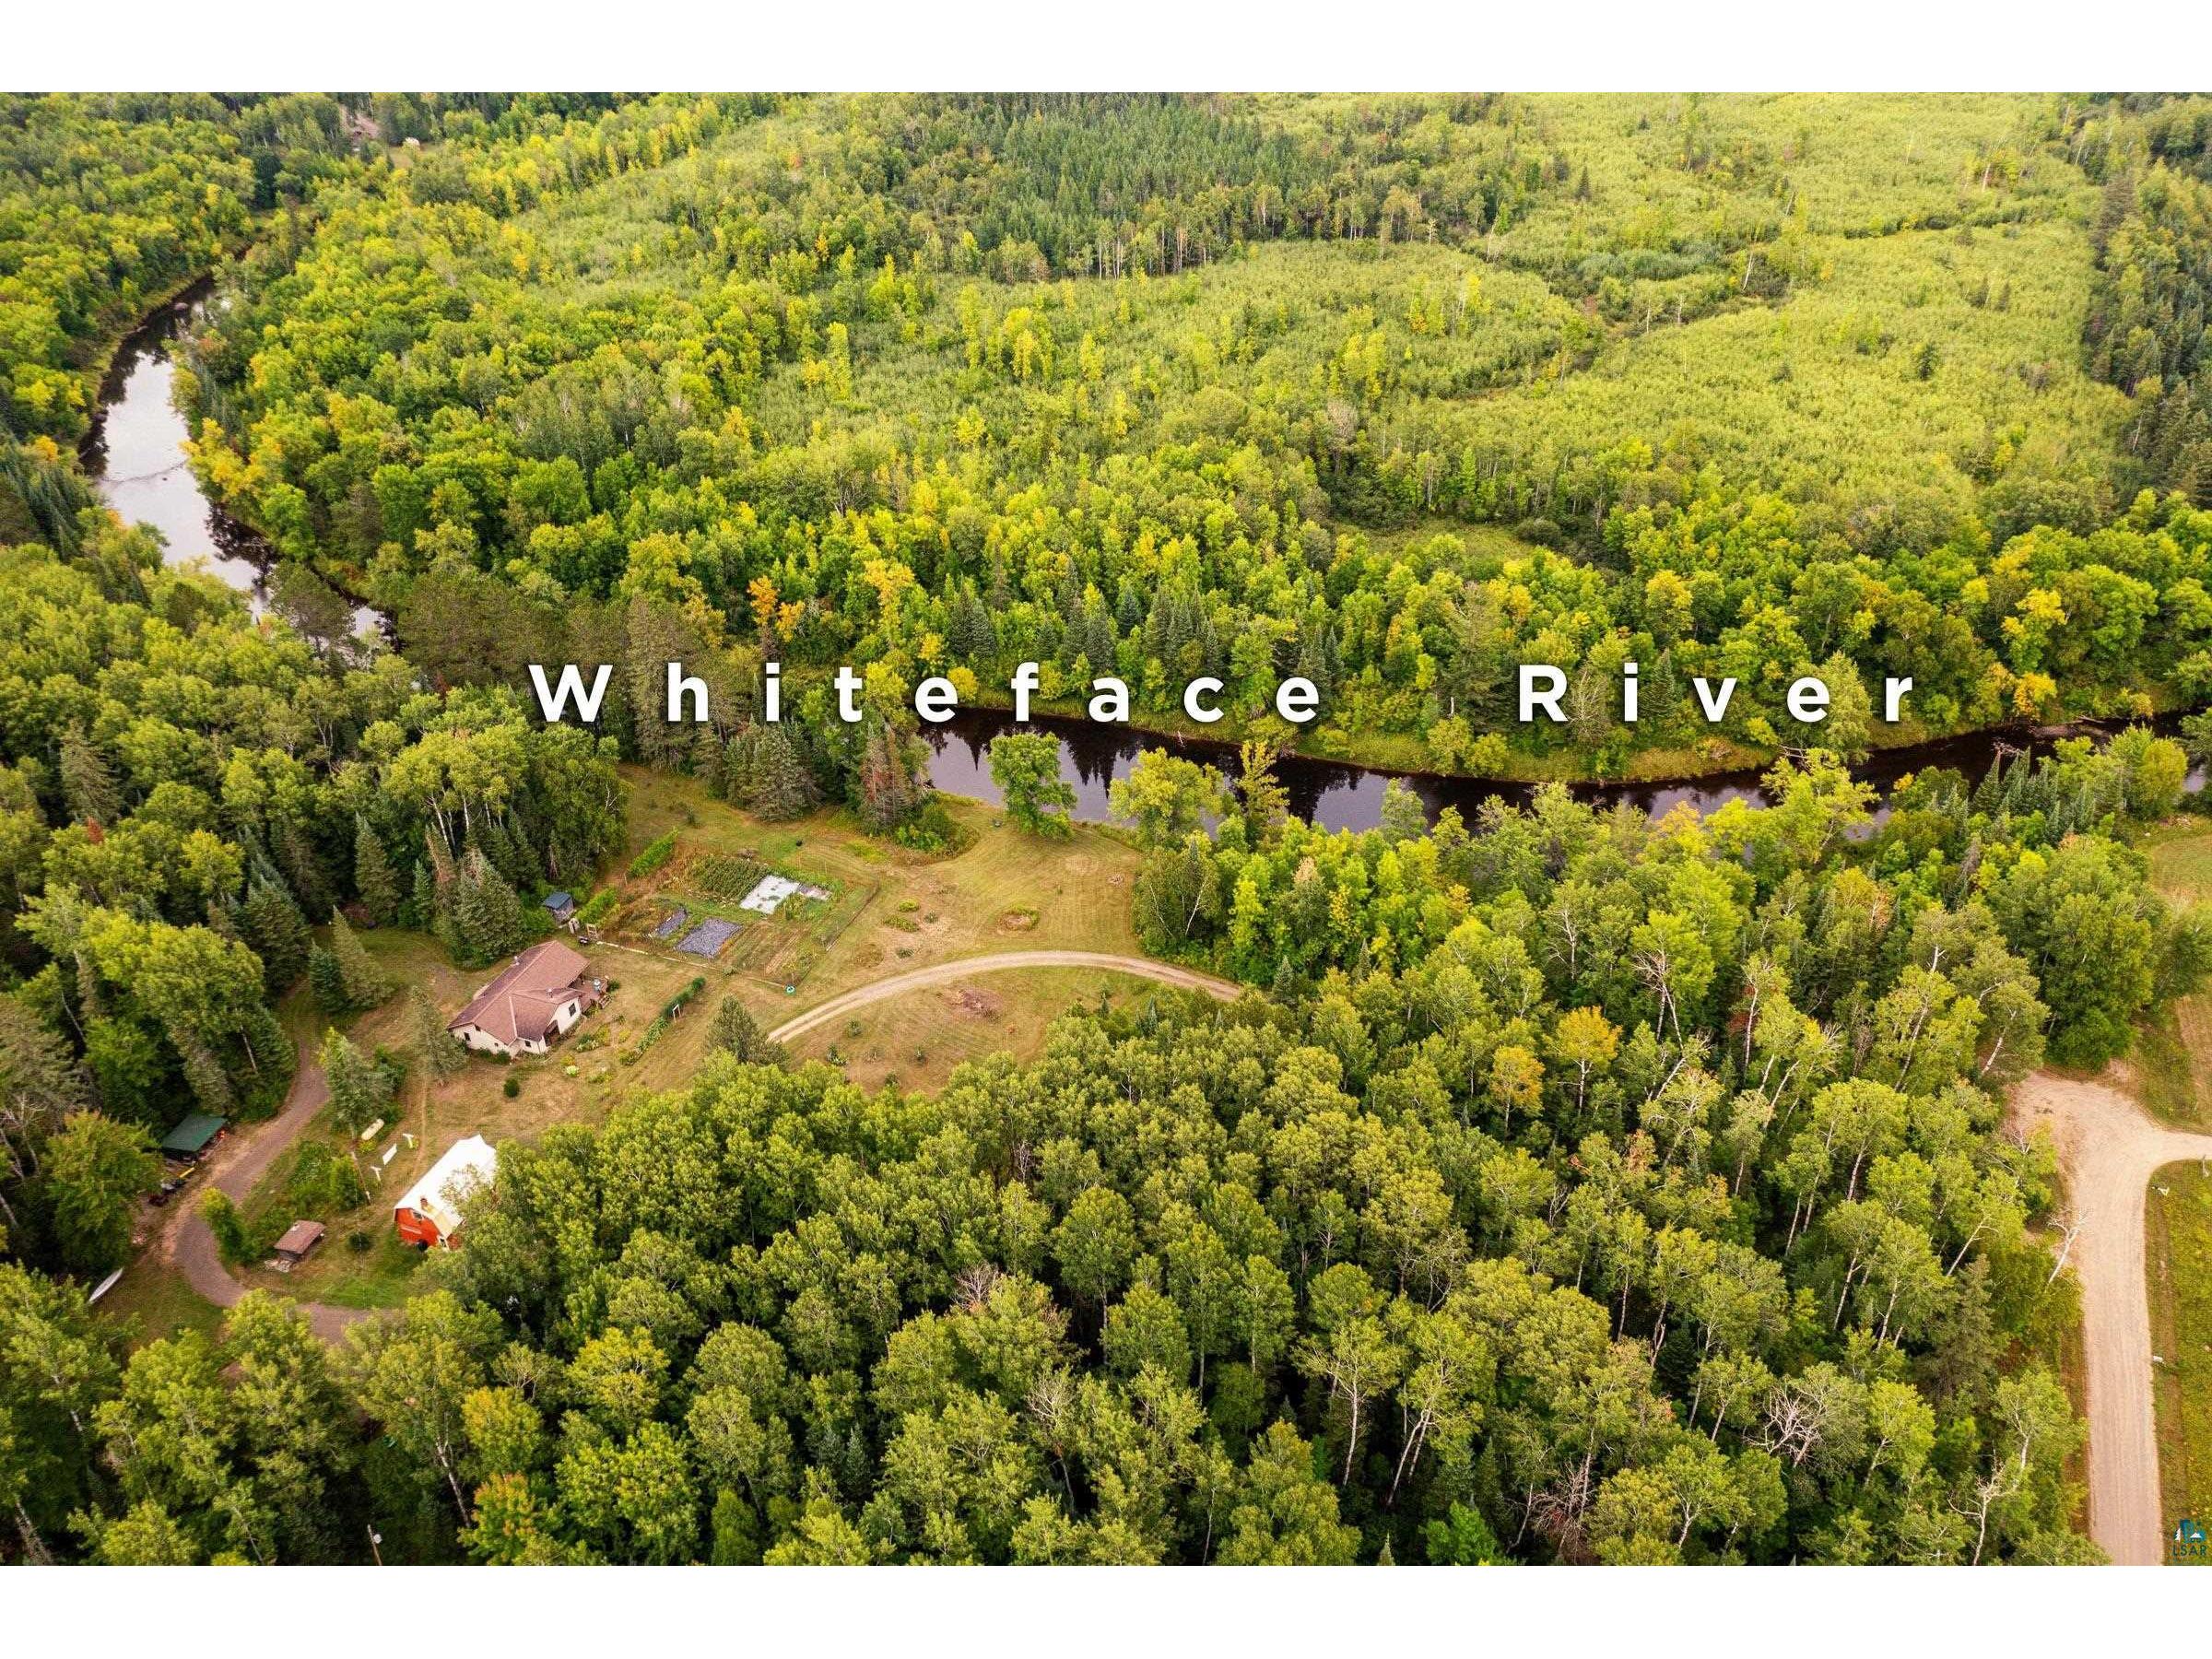 8215 Kelsey Whiteface Rd Cotton MN 55724 - Whiteface 6113313 image2